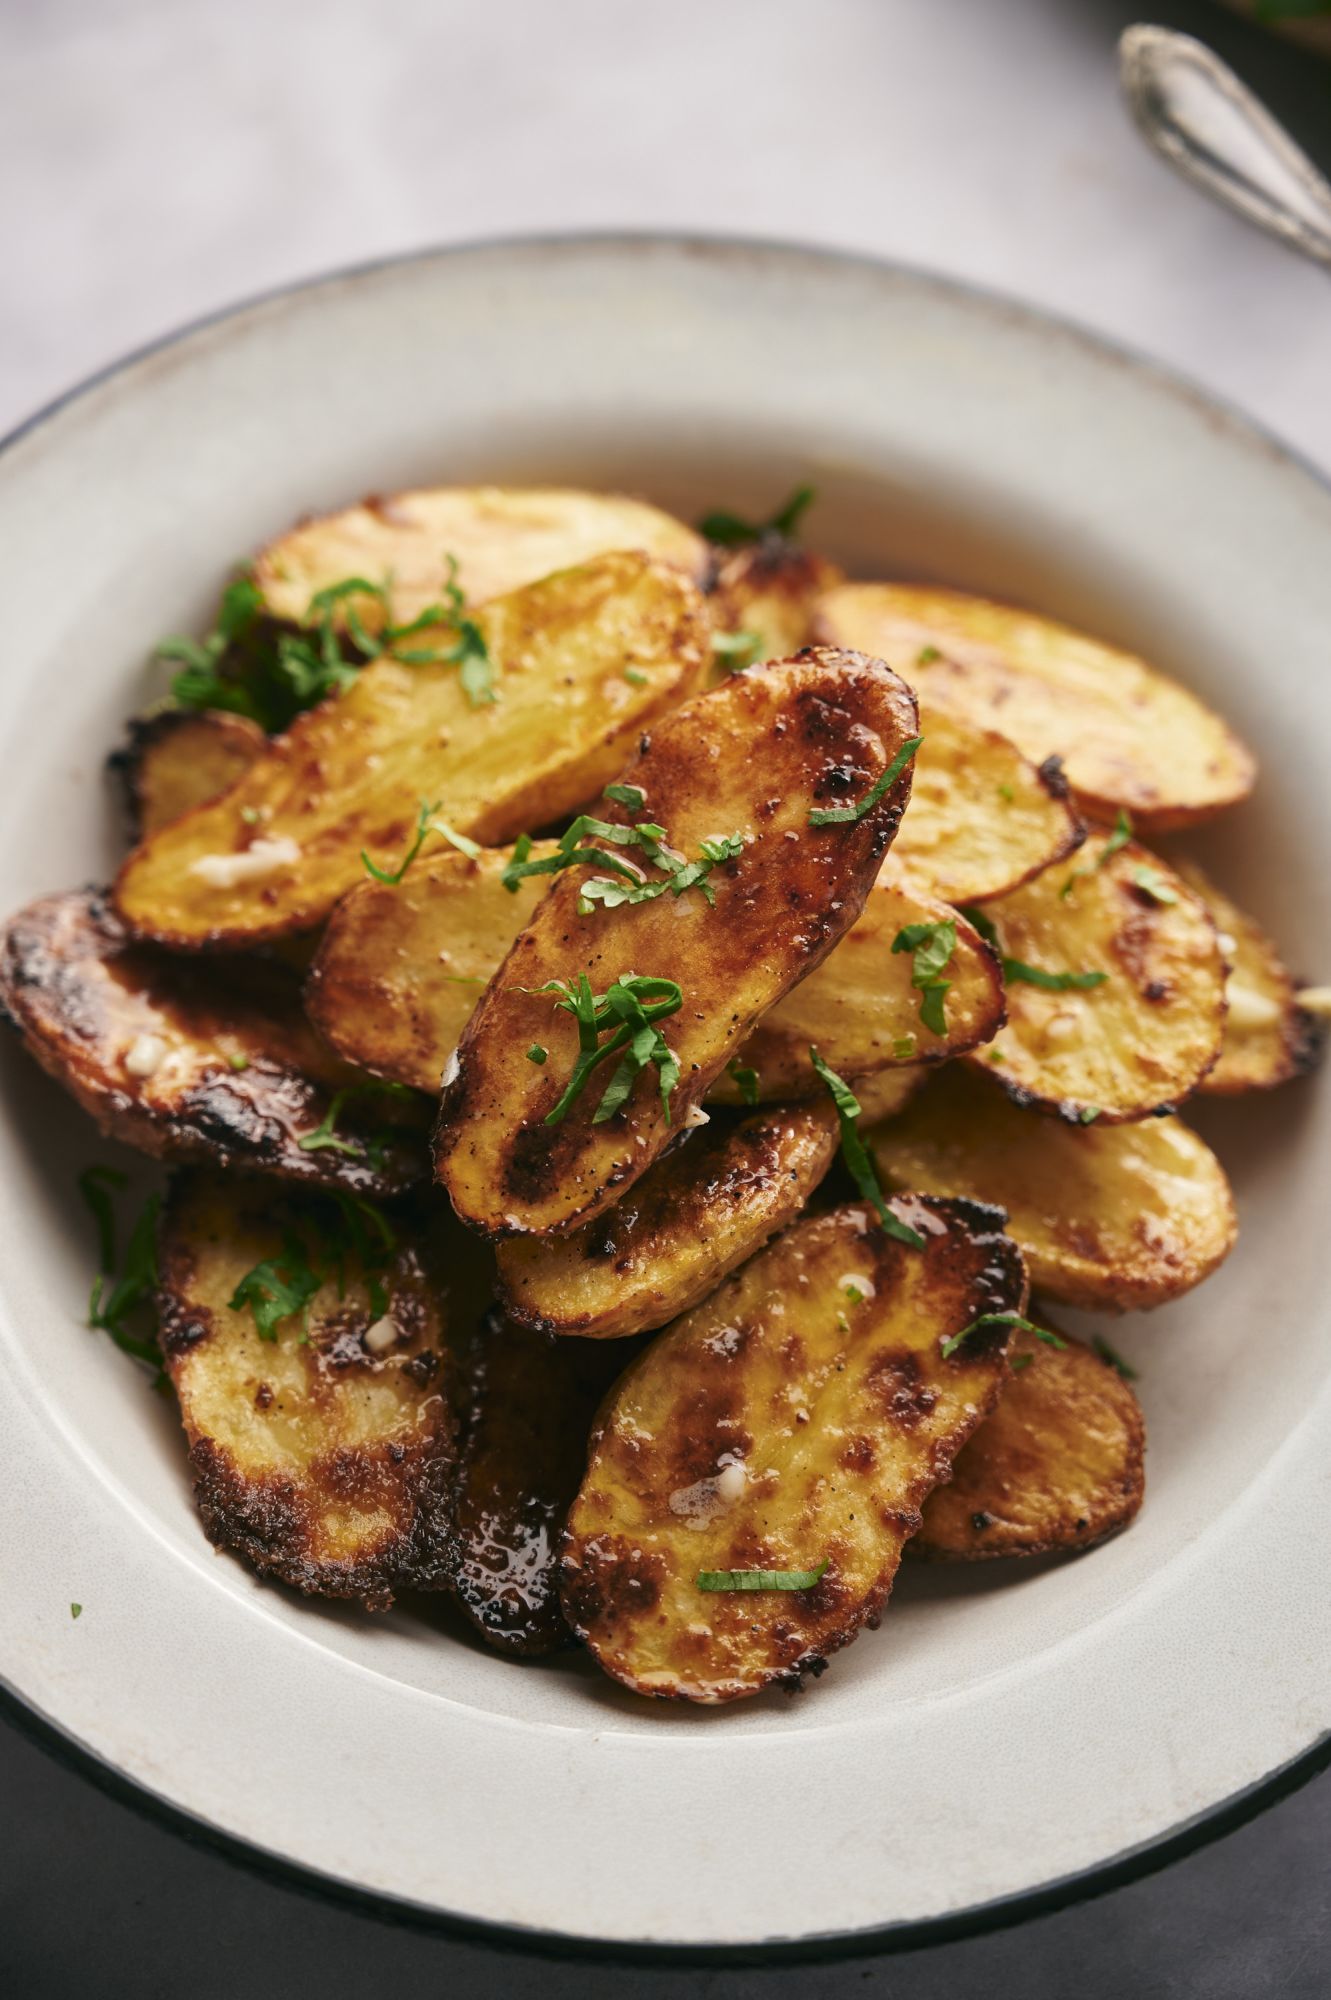 Fingerling potatoes roasted with olive oil and spices with crispy browned edges served with parsley.